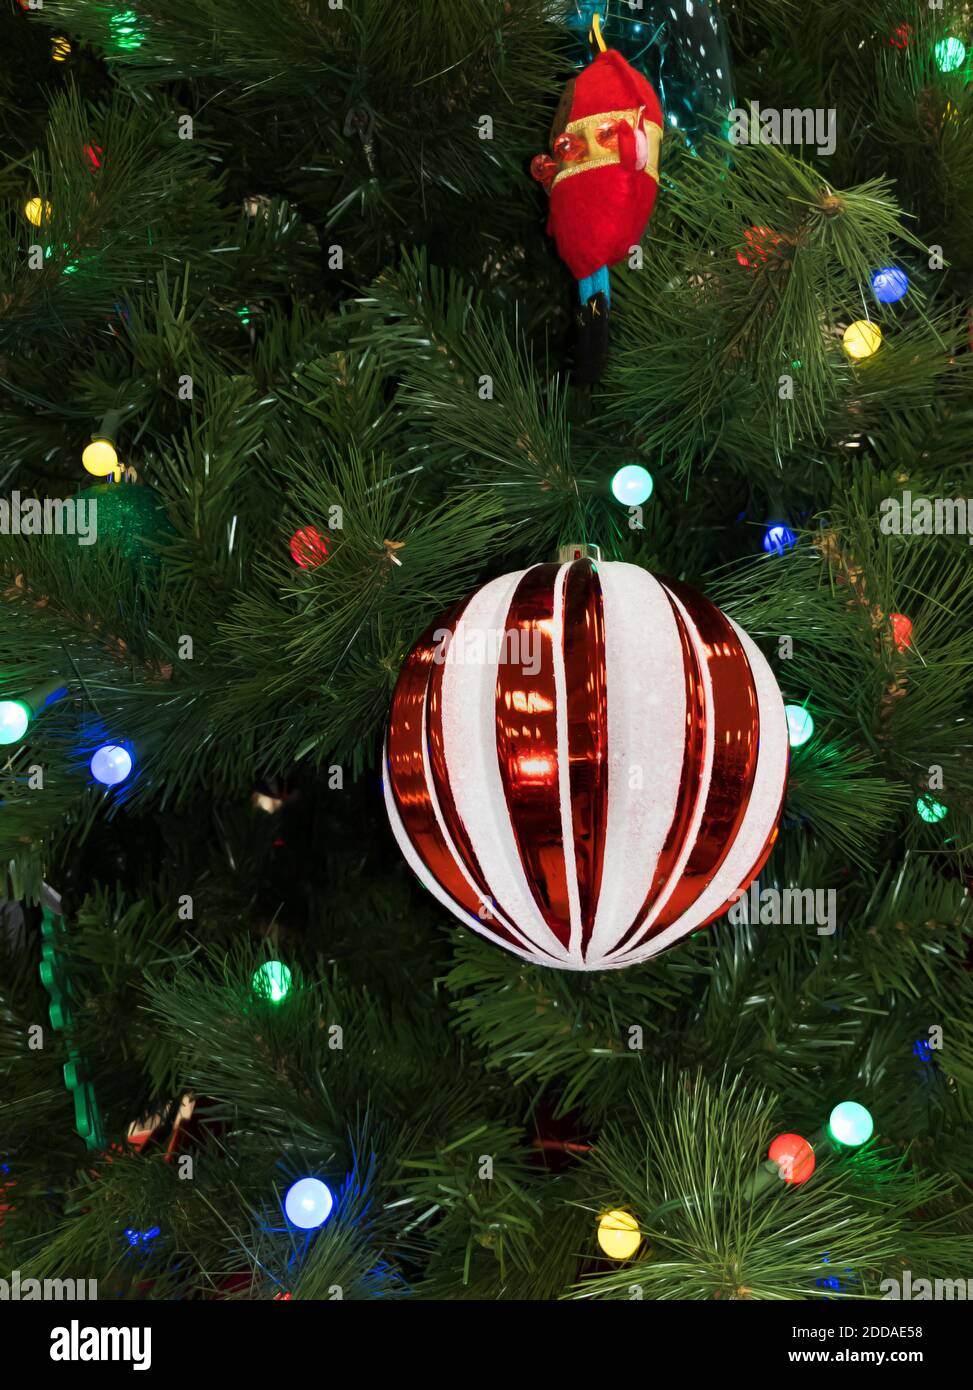 Red and White Ball Ornament on Lit Christmas Tree Stock Photo